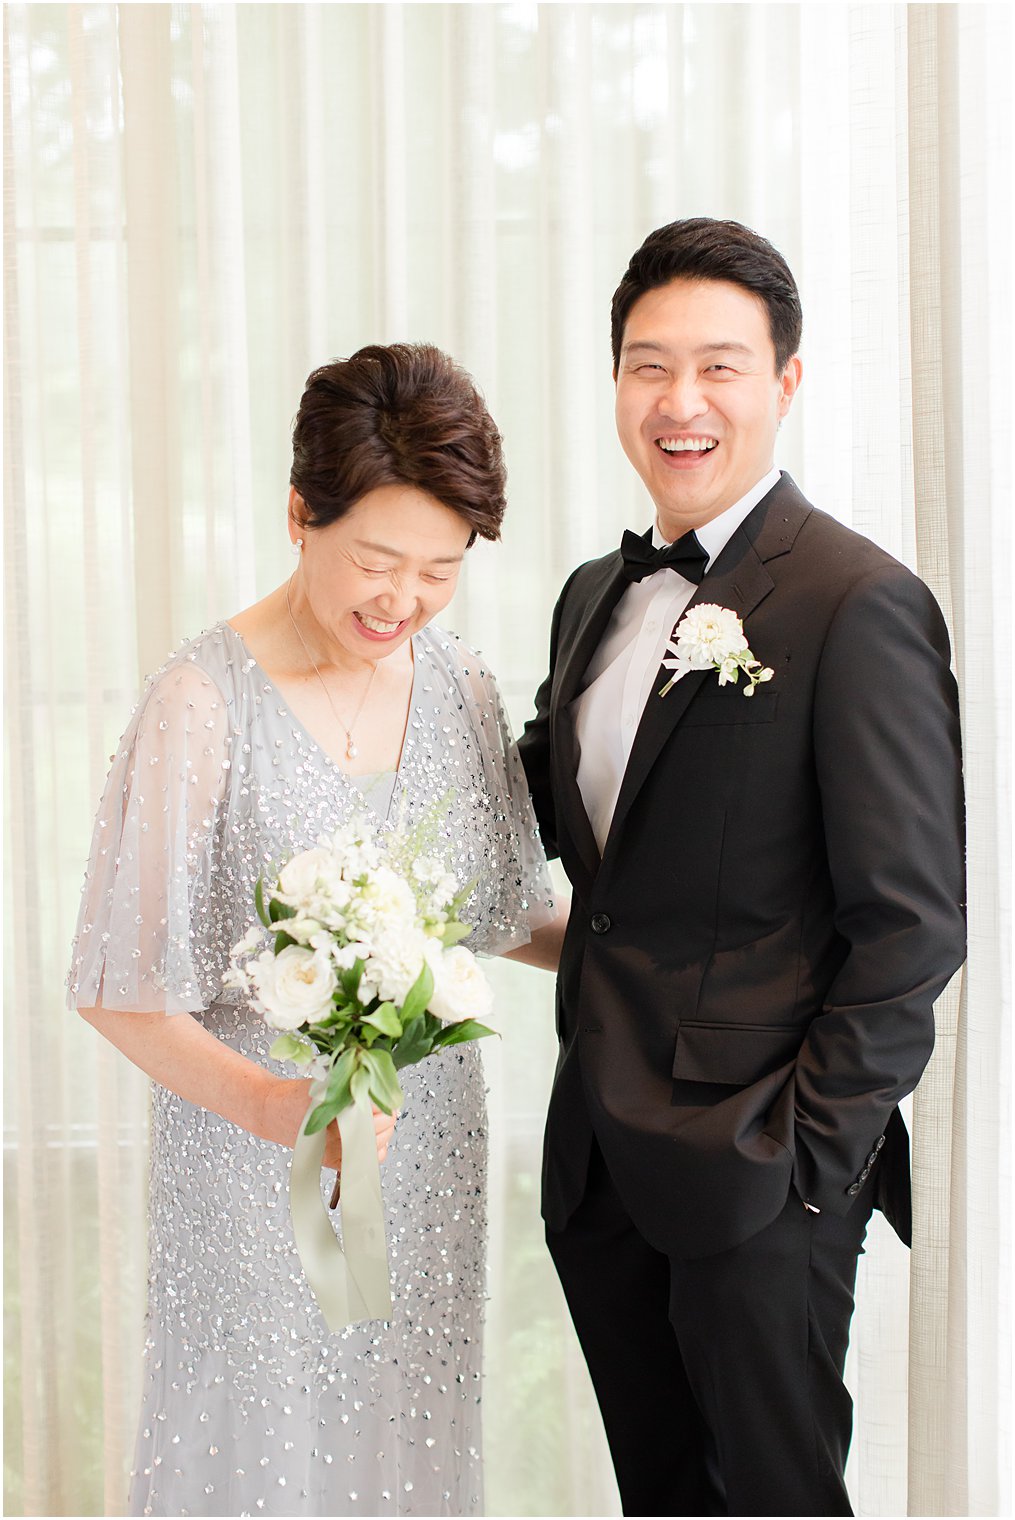 mother and son share a laugh together before wedding